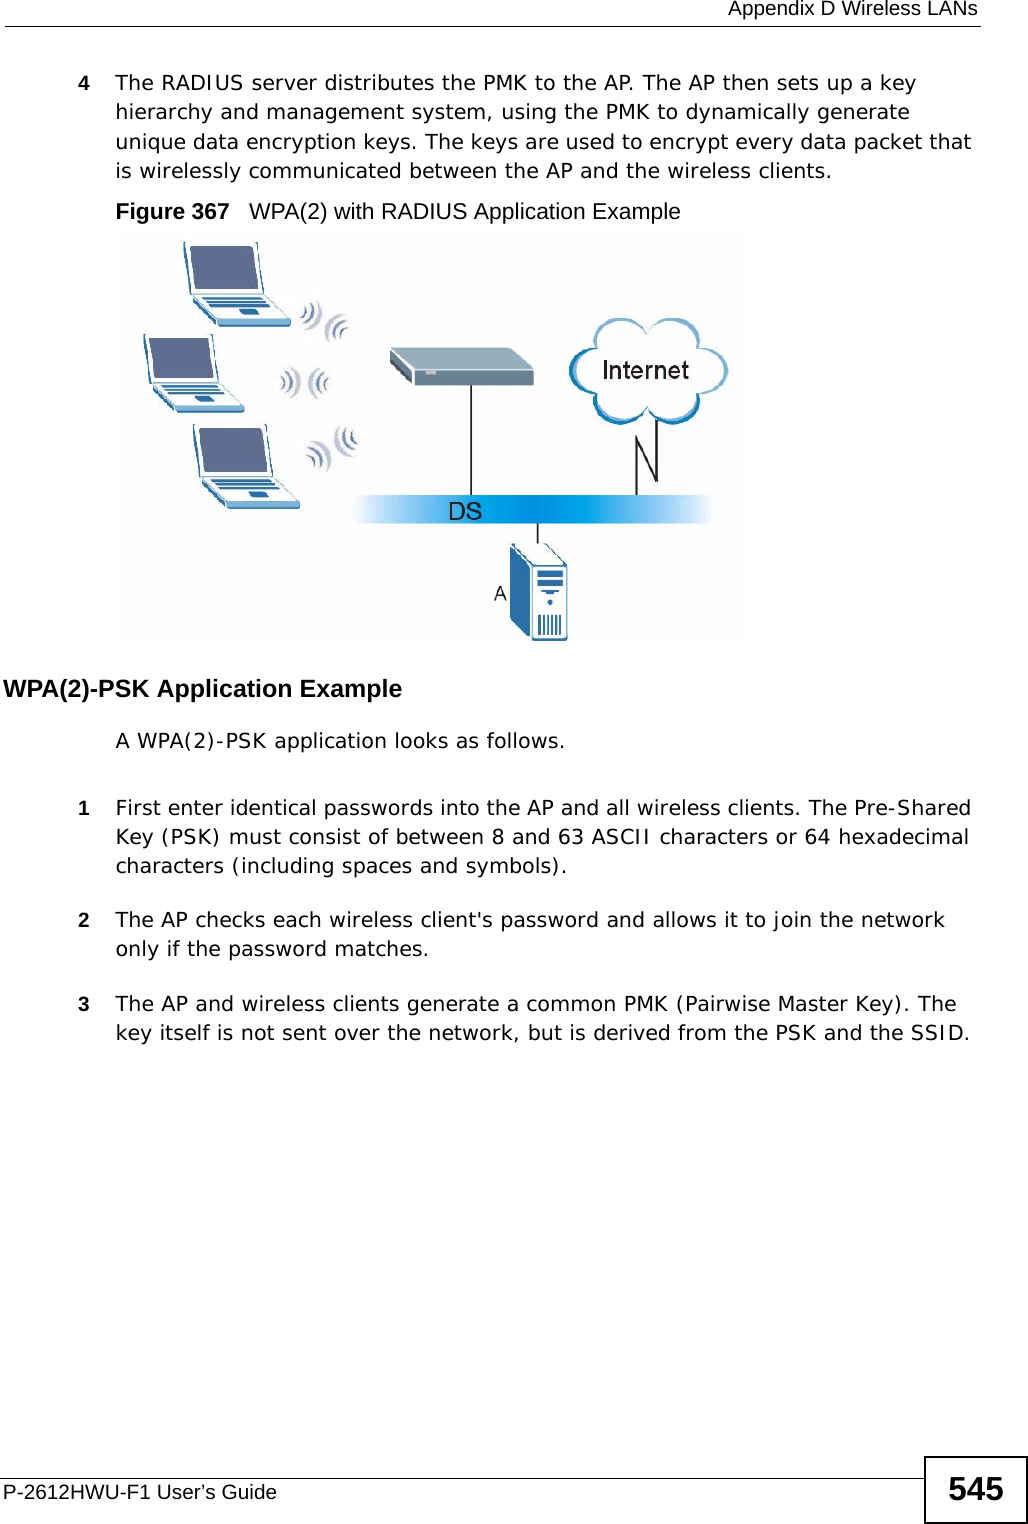  Appendix D Wireless LANsP-2612HWU-F1 User’s Guide 5454The RADIUS server distributes the PMK to the AP. The AP then sets up a key hierarchy and management system, using the PMK to dynamically generate unique data encryption keys. The keys are used to encrypt every data packet that is wirelessly communicated between the AP and the wireless clients.Figure 367   WPA(2) with RADIUS Application ExampleWPA(2)-PSK Application ExampleA WPA(2)-PSK application looks as follows.1First enter identical passwords into the AP and all wireless clients. The Pre-Shared Key (PSK) must consist of between 8 and 63 ASCII characters or 64 hexadecimal characters (including spaces and symbols).2The AP checks each wireless client&apos;s password and allows it to join the network only if the password matches.3The AP and wireless clients generate a common PMK (Pairwise Master Key). The key itself is not sent over the network, but is derived from the PSK and the SSID. 